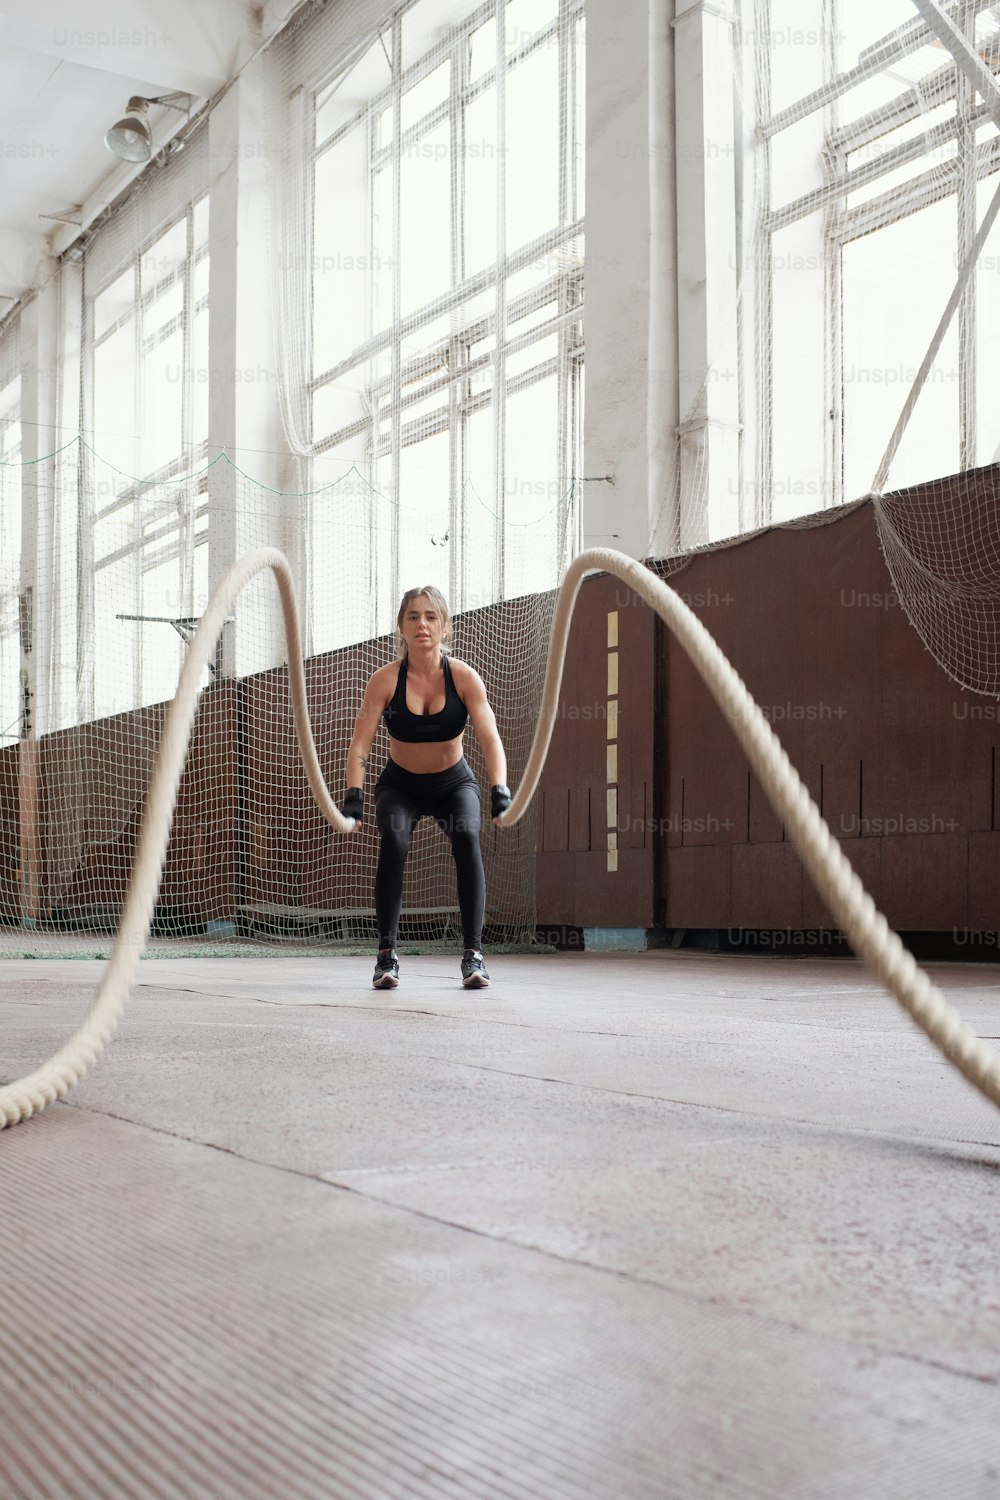 Battle rope workout. Young slim Caucasian woman in black sportswear burning calories by doing exercise with ropes in gym